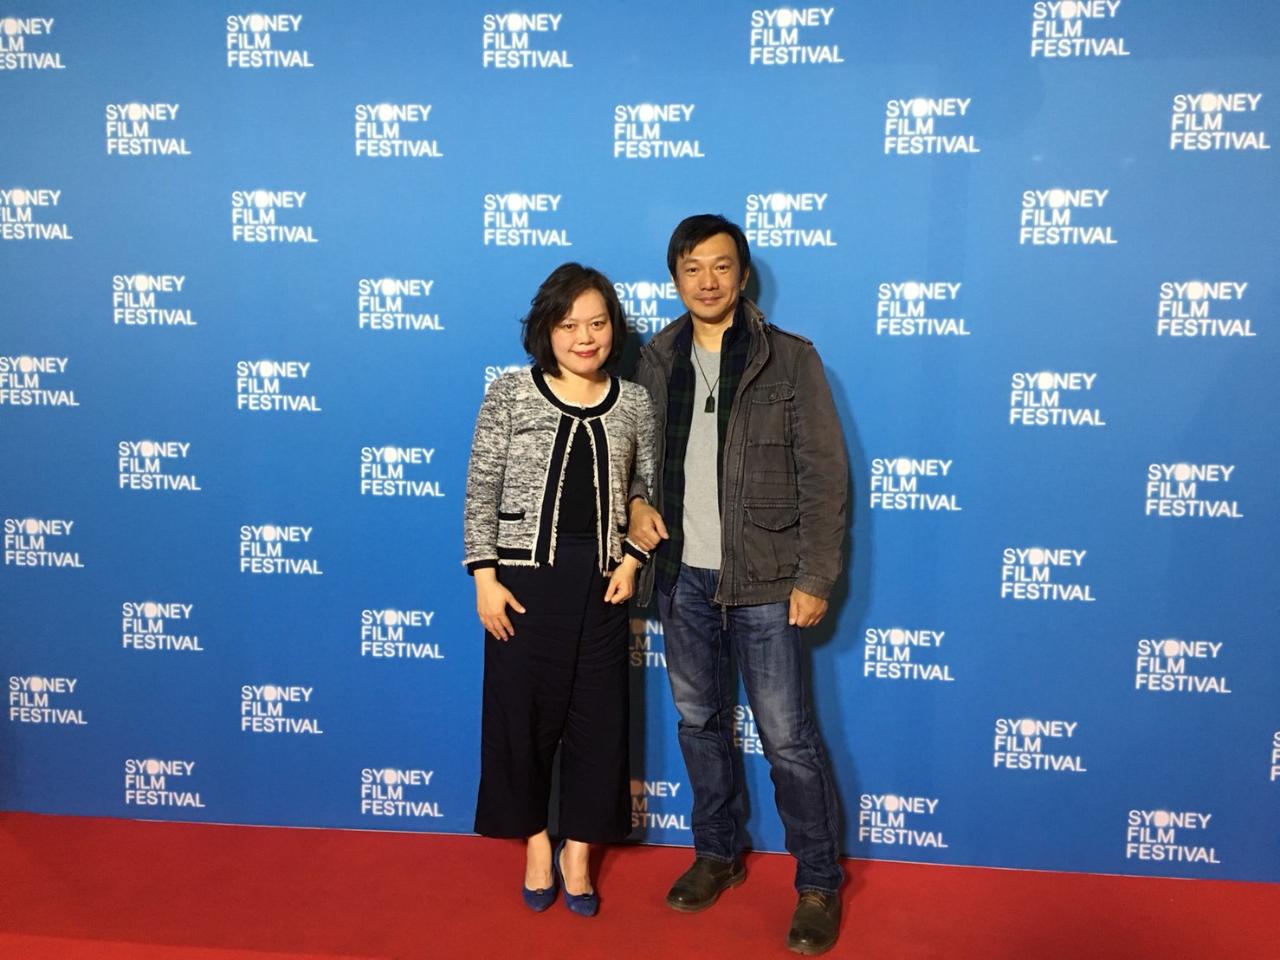 Director General Constance Wang with Mr. Hsin-Yao Huang, film director of "The Great Buddha+" at the Australian premier